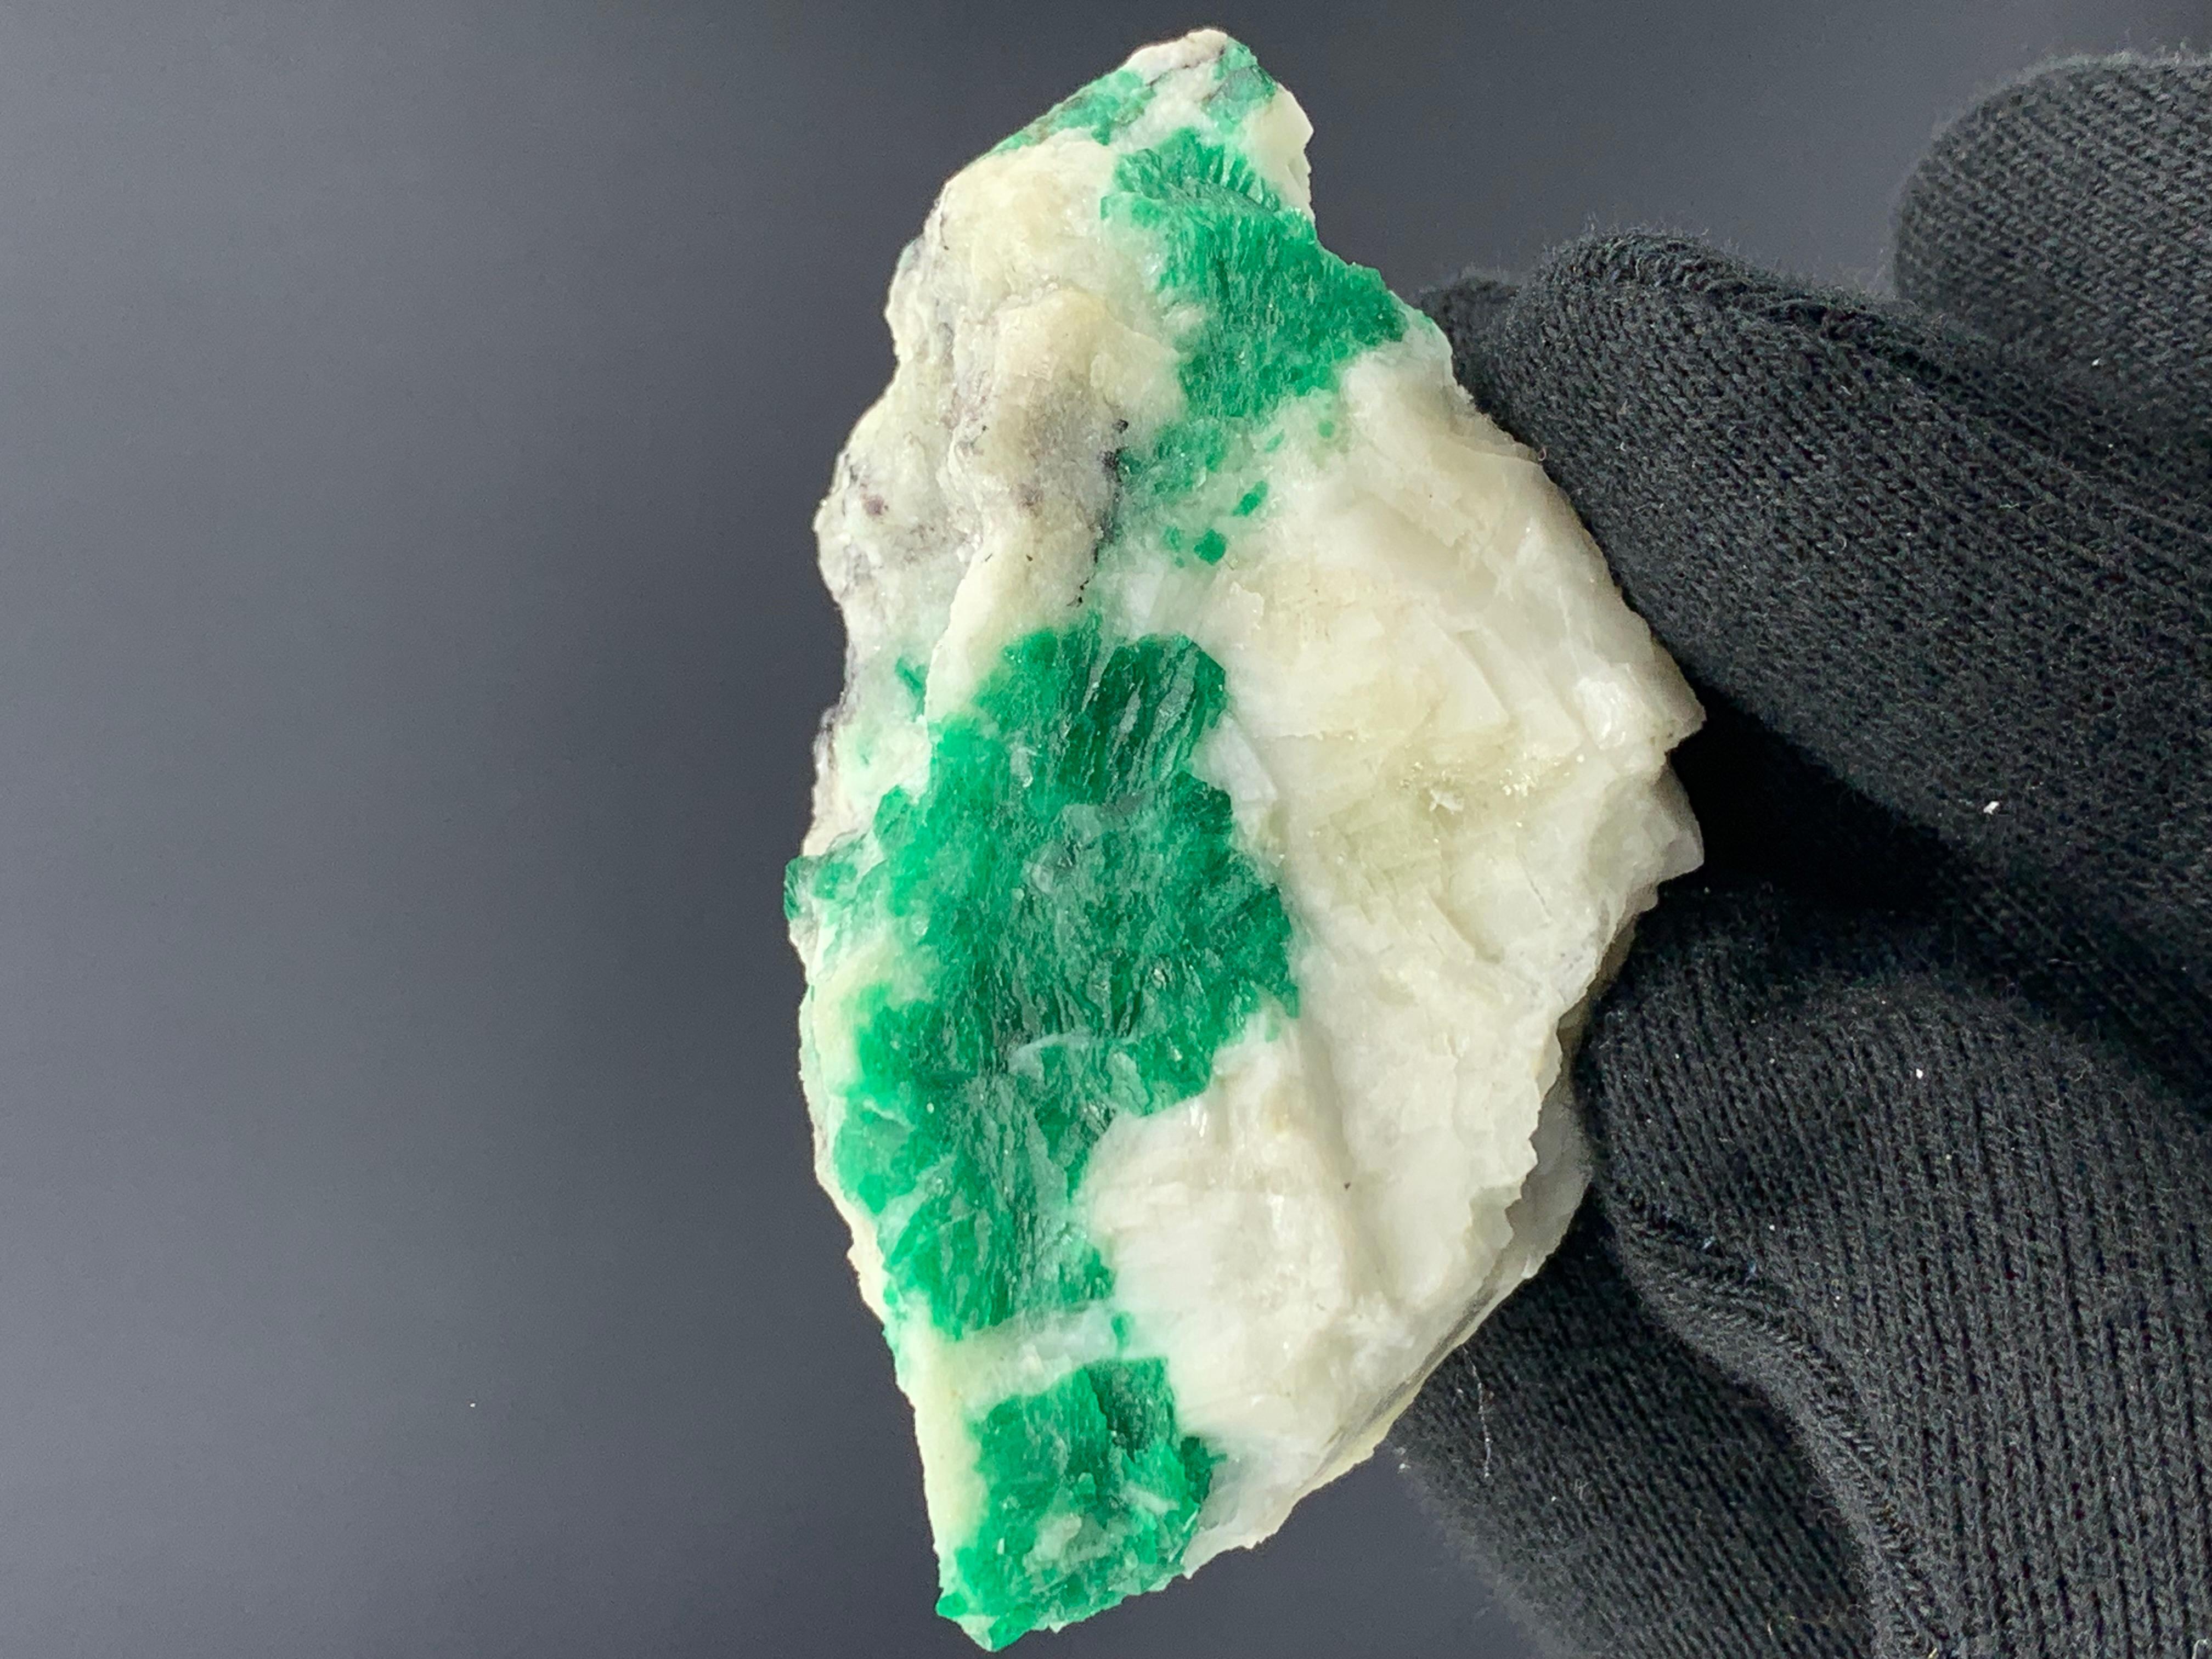 98.71 Gram Gorgeous Emerald Specimen From Swat Valley, Pakistan 

Weight: 98.71 Gram 
Dimension: 6.6 x 4.3 x 3.1 Cm
Origin: Swat Valley, Khyber Pakhtunkhwa Province, Pakistan 

Emerald has the chemical composition Be3Al2(SiO3)6 and is classified as